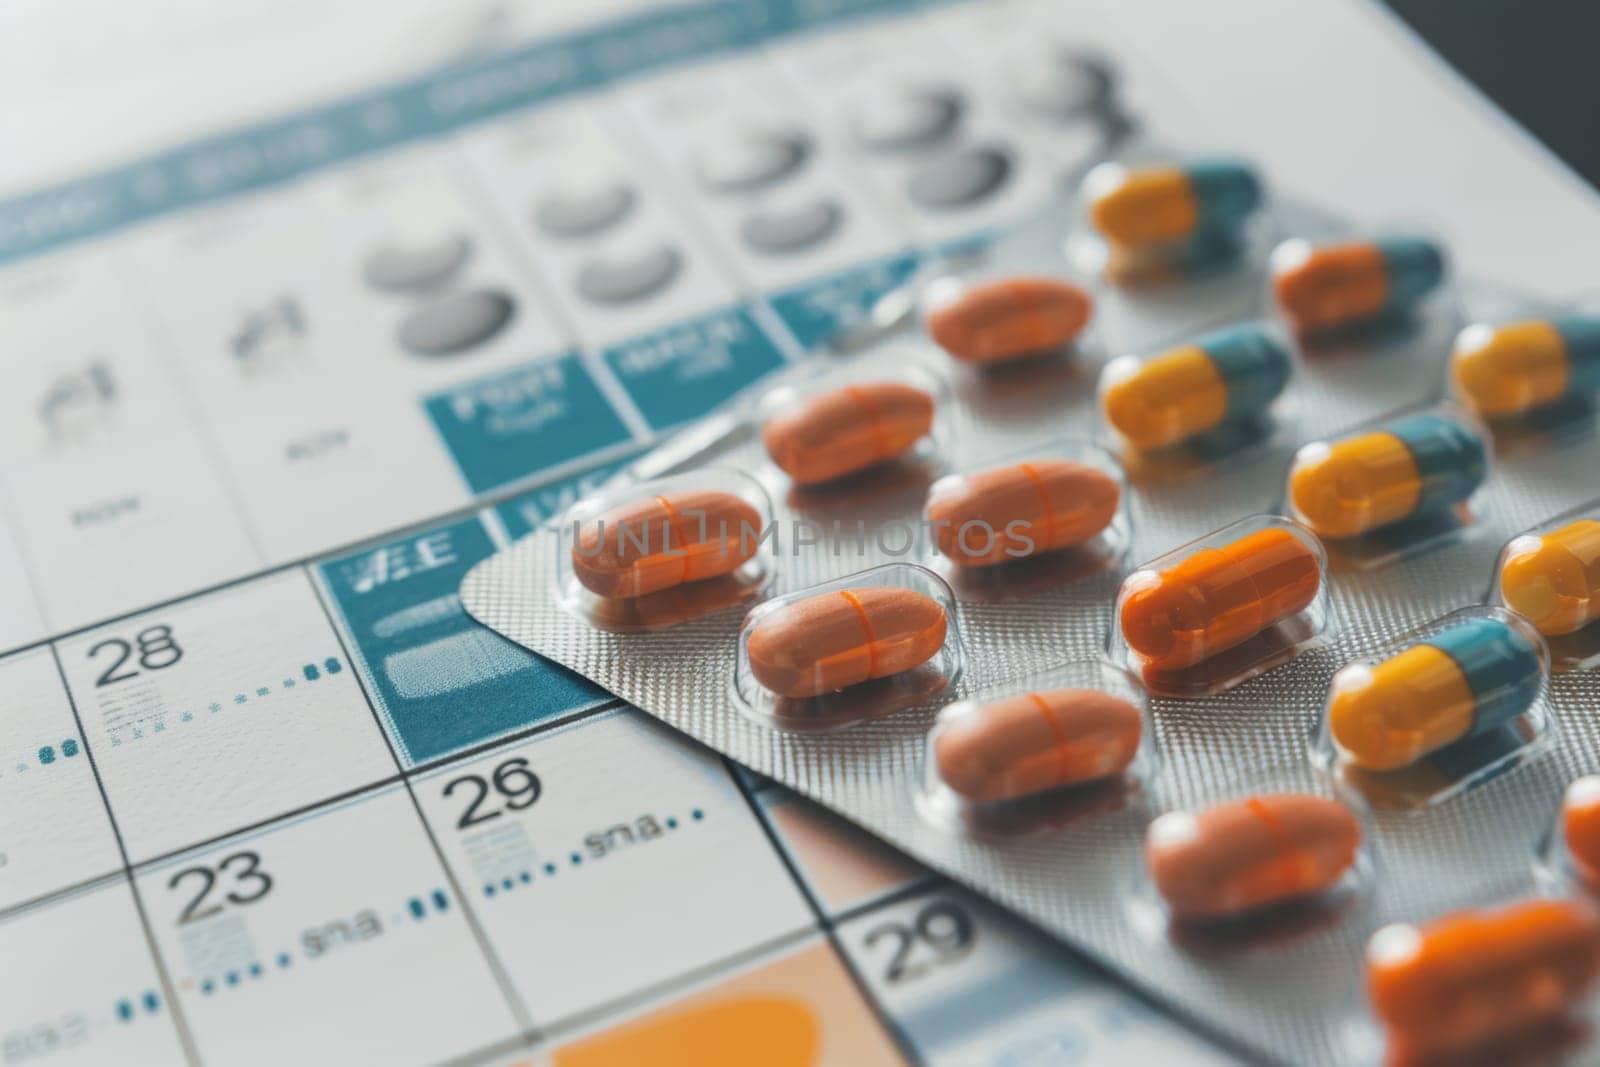 Blister packs of pills organized beside a calendar, depicting the careful management of medication schedules for health treatment